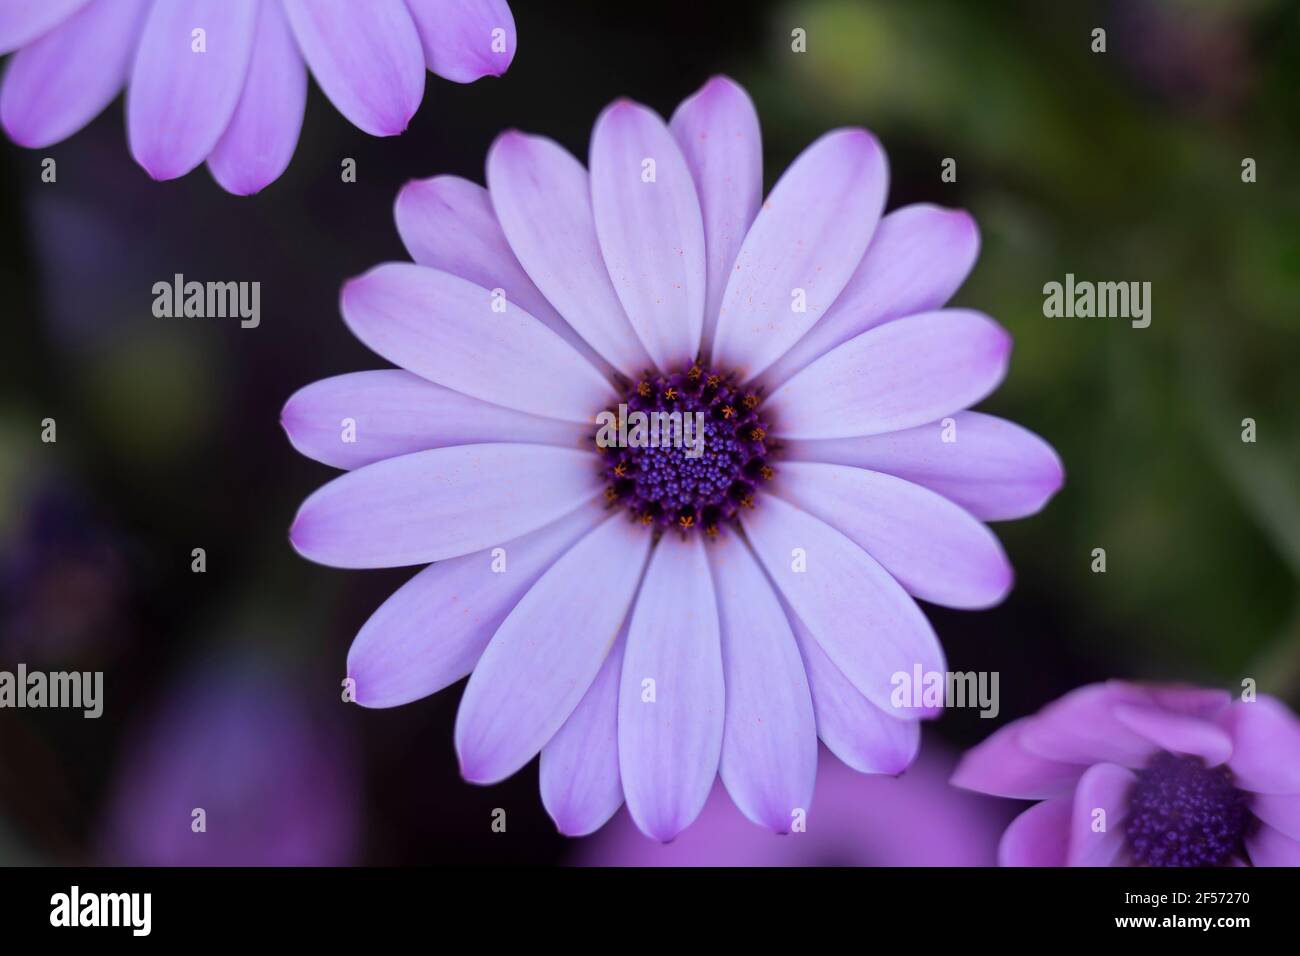 macro photography of purple daisy.close-up aerial photograph. Horizontal photograph, blurred background Stock Photo